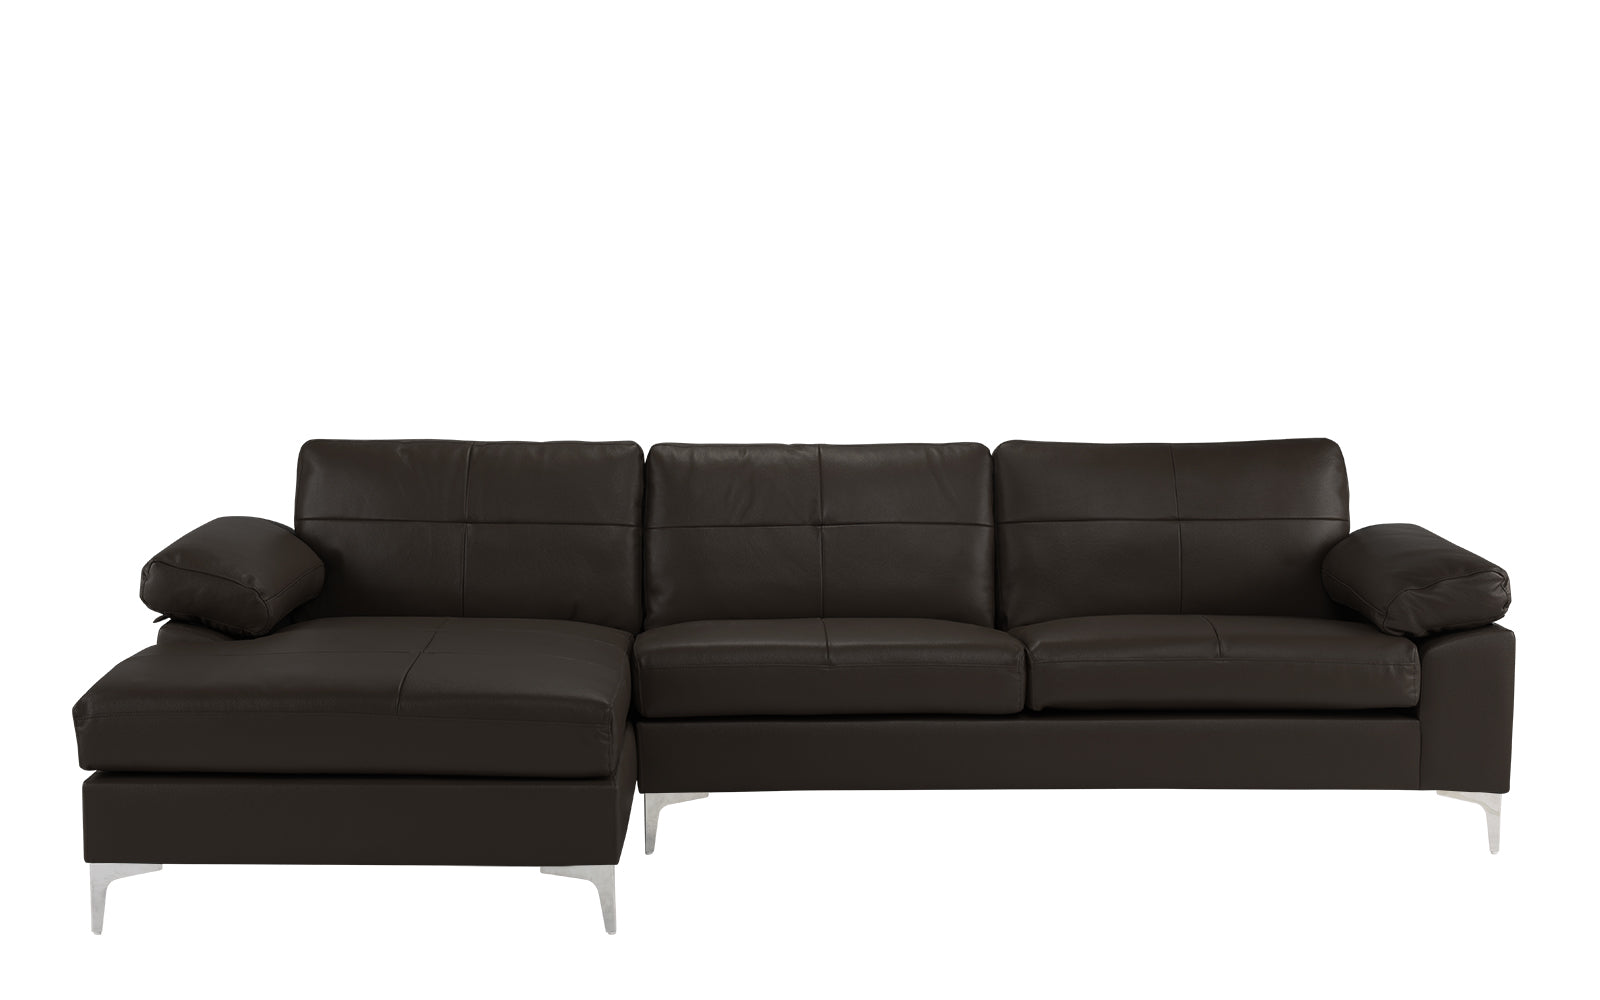 Mai Modern Leather Match Low Profile L-Shape Sectional Sofa with Left Chaise